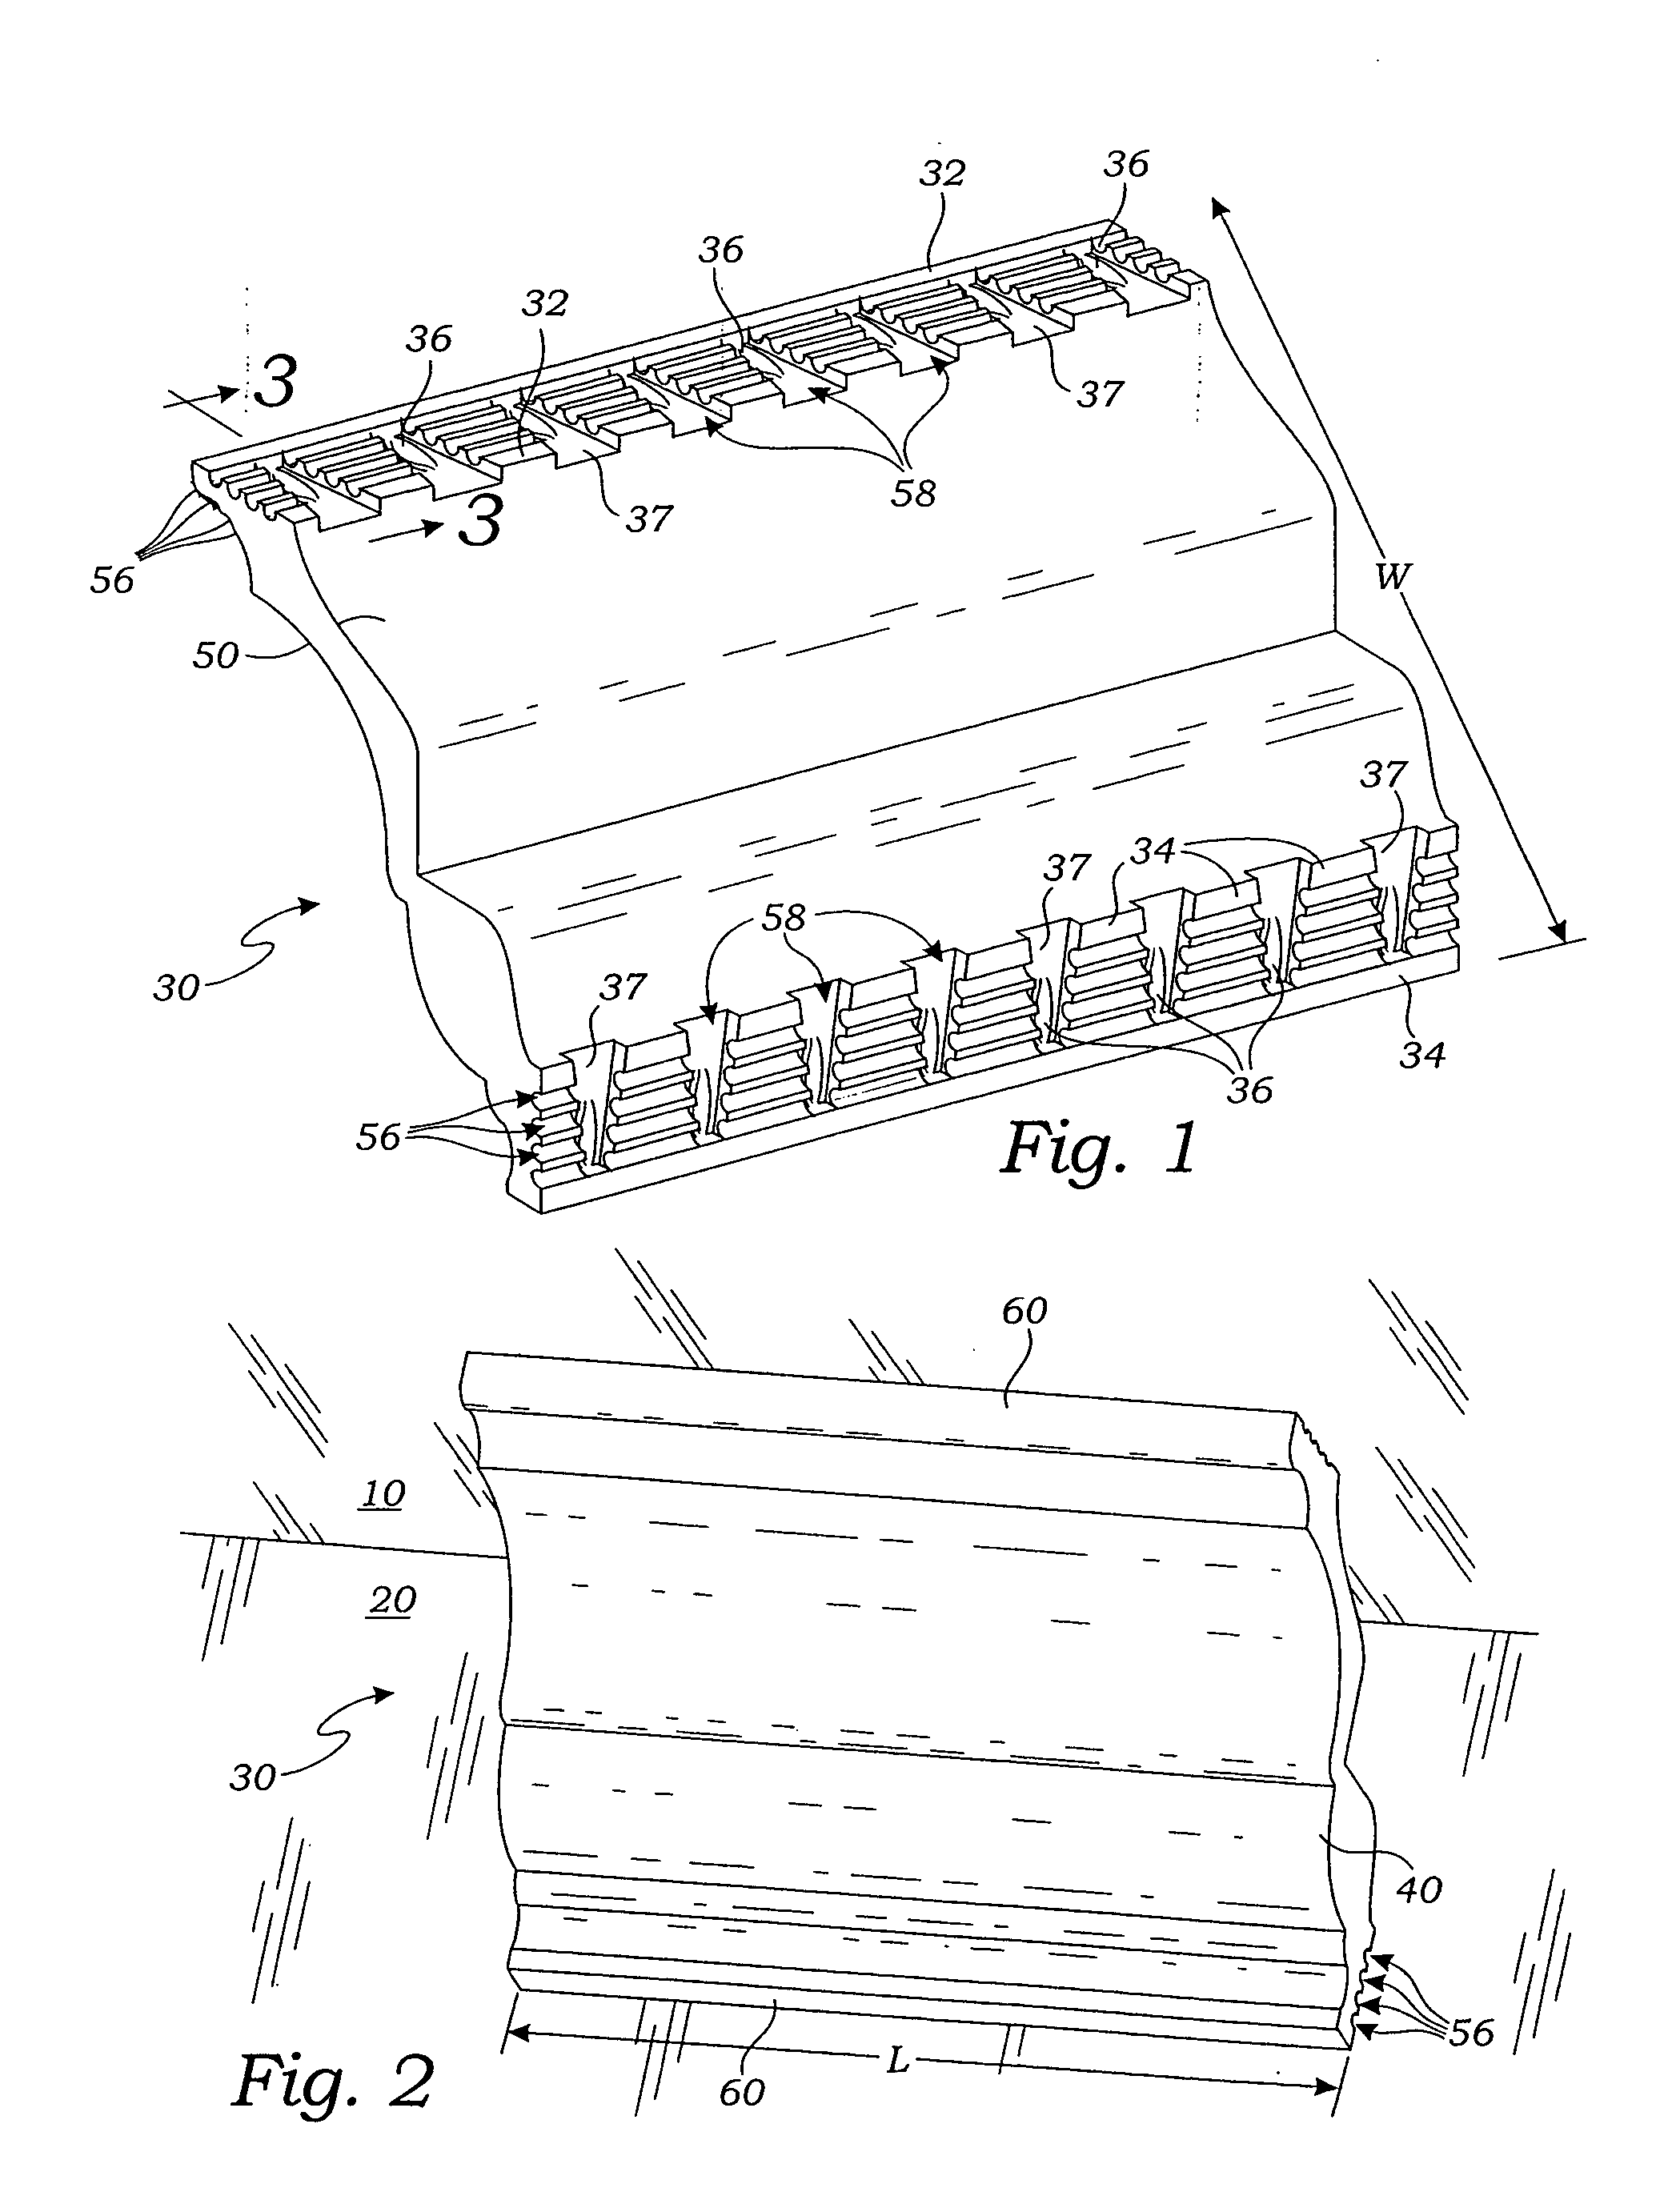 Crown molding with improved mounting surfaces